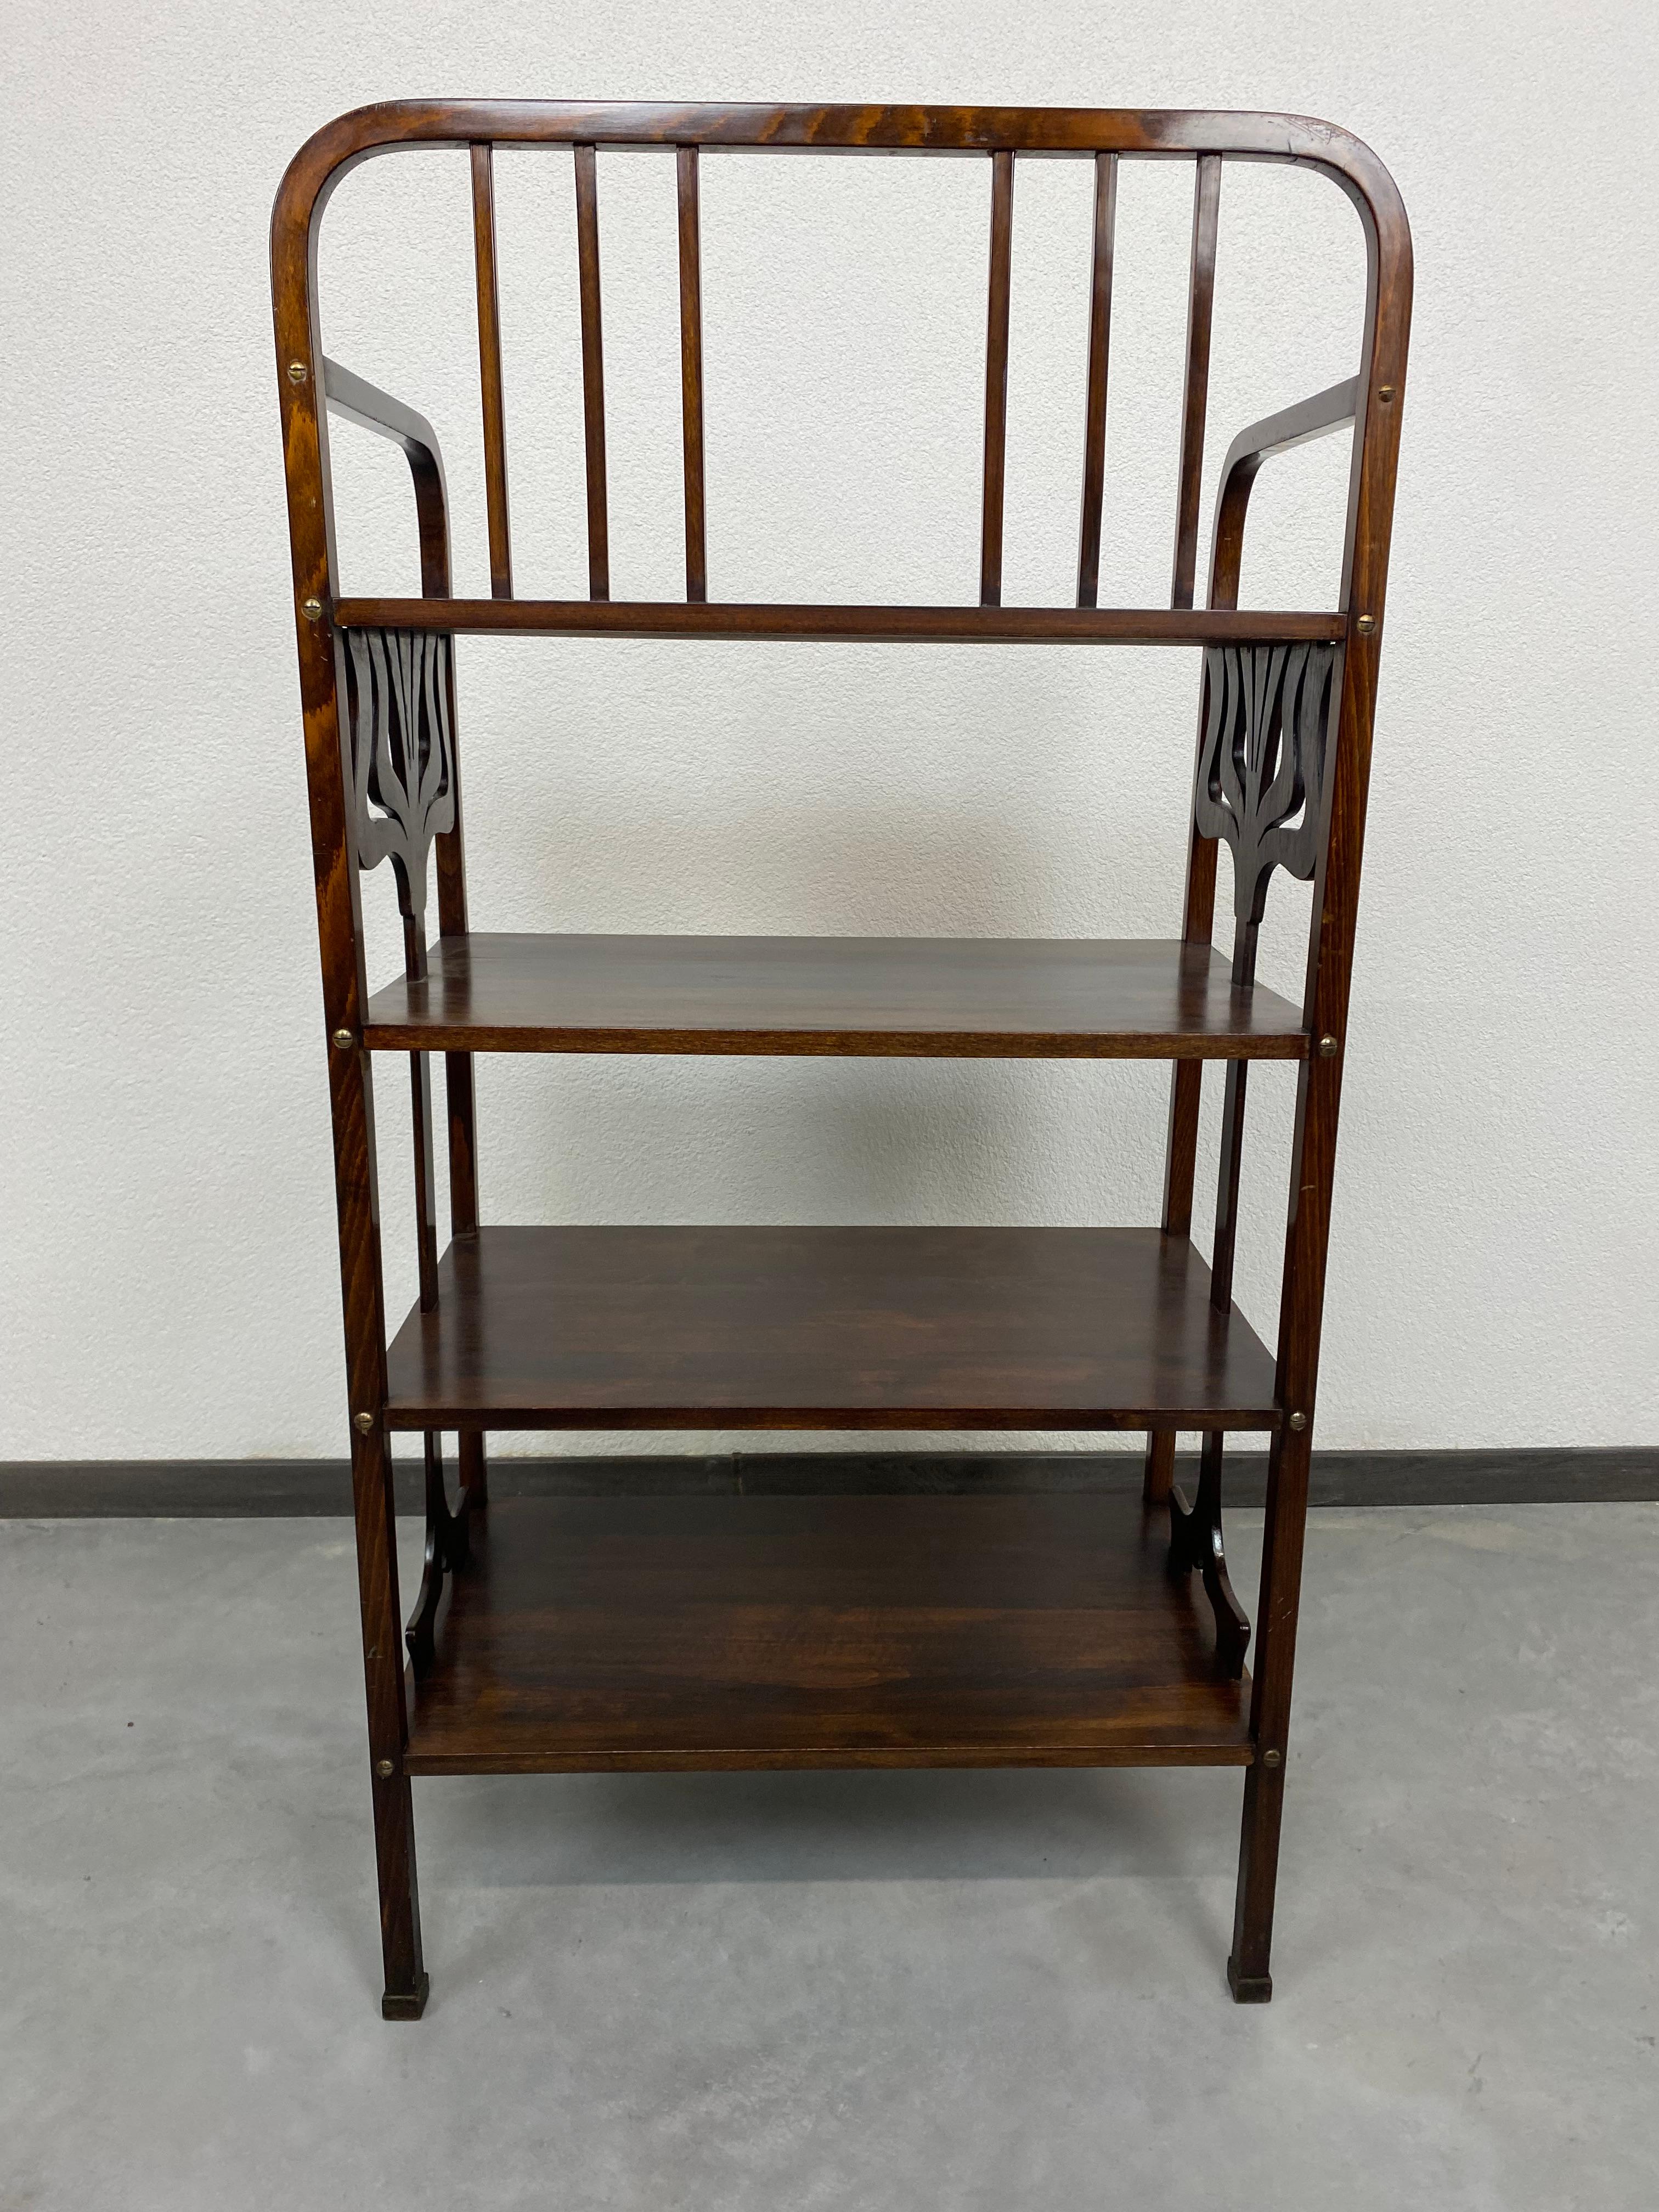 Bentwood Secession Etagere No.41 by Thonet